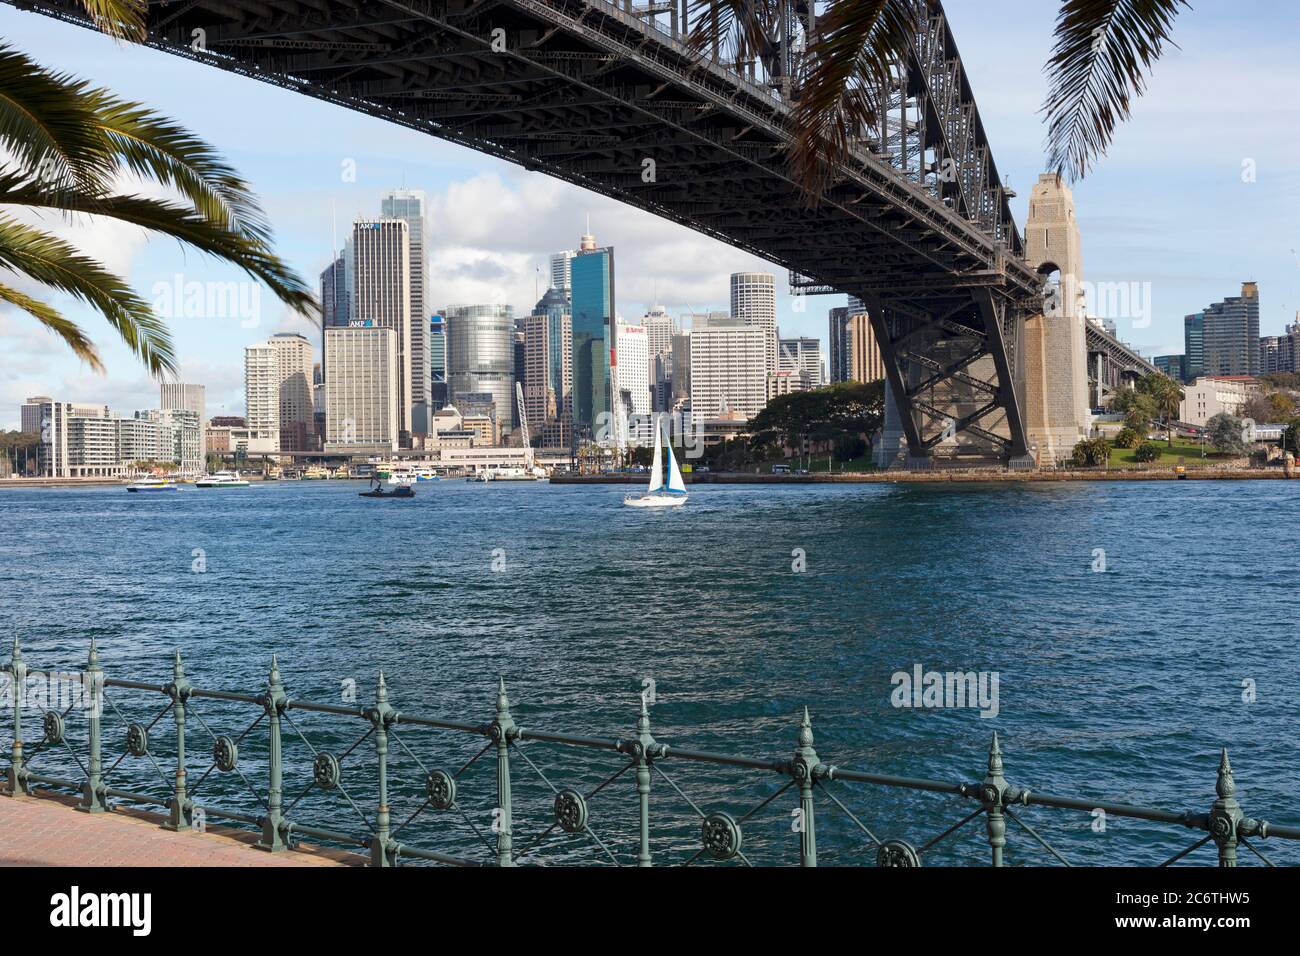 View of the city and Sydney harbourside taken from under the iconic harbour bridge at water level. Stock Photo